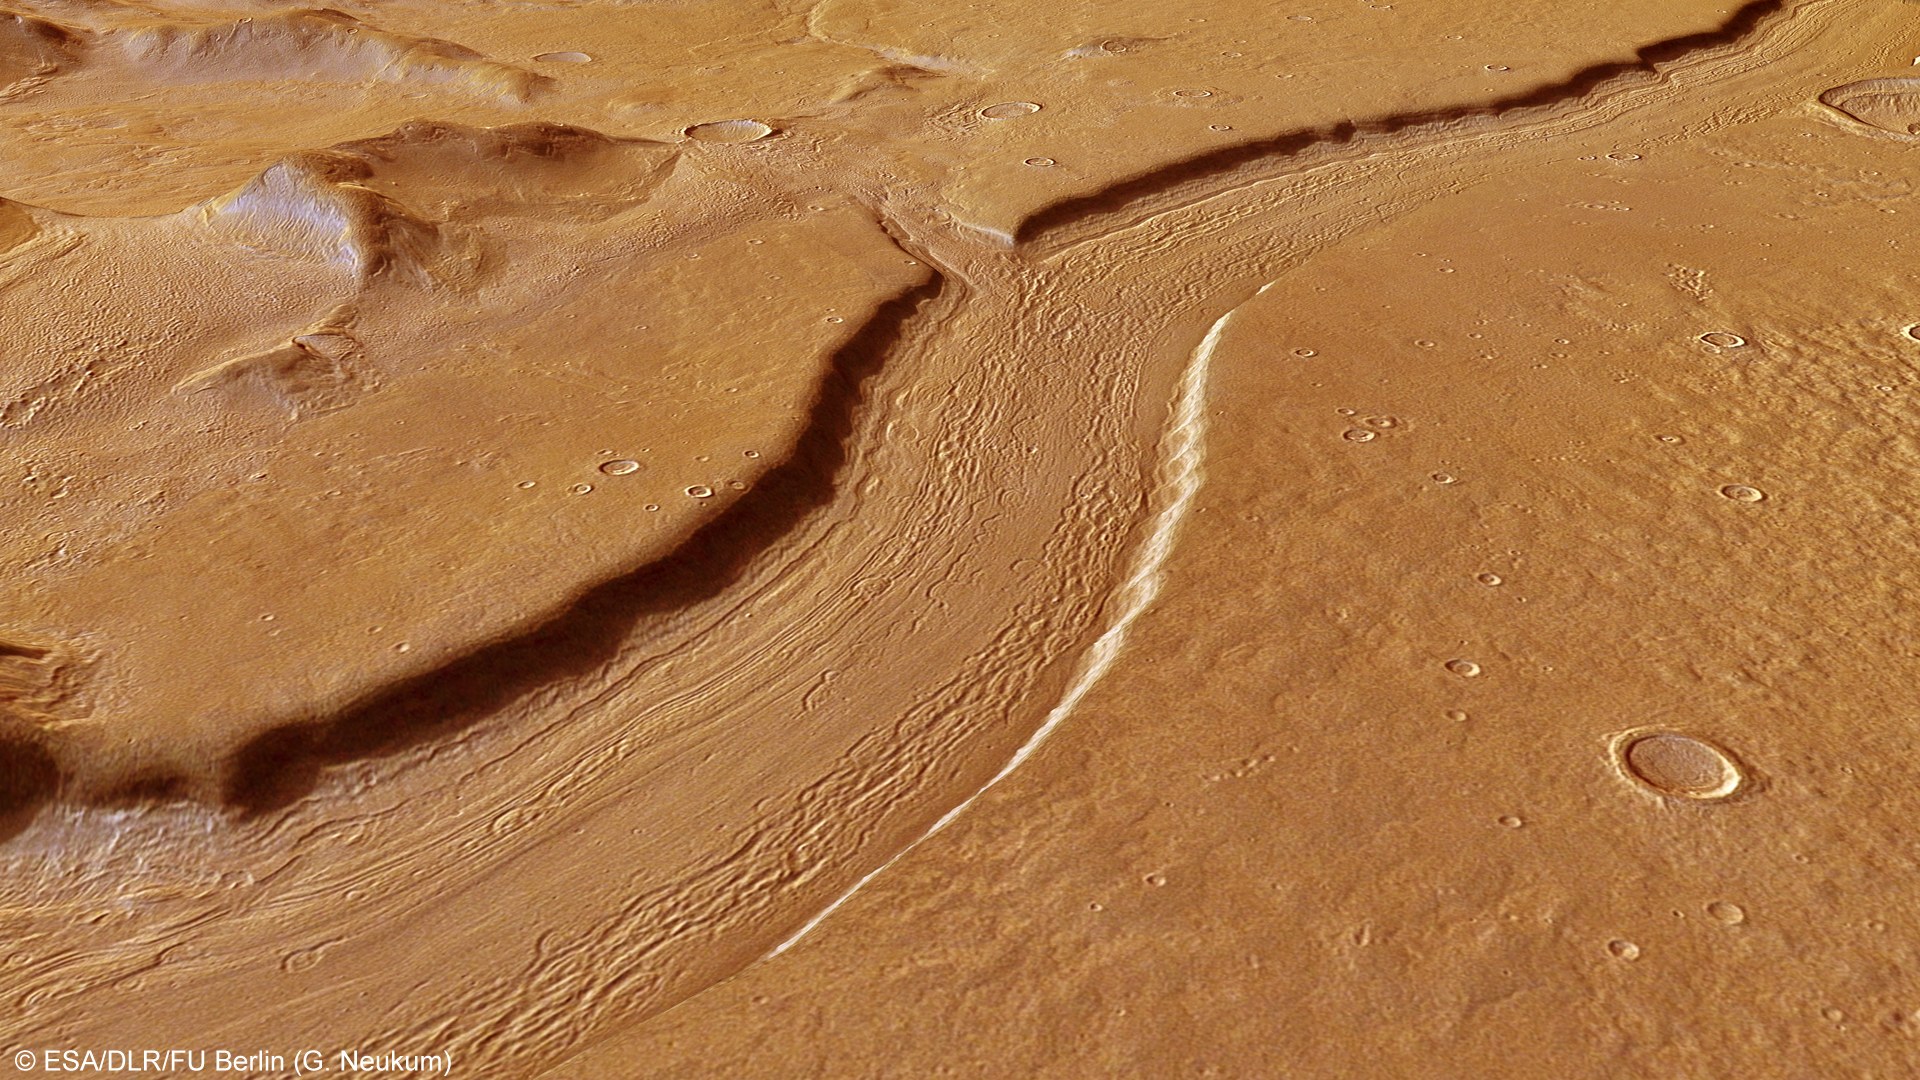 Rubble and boulder deposits in Reull Vallis